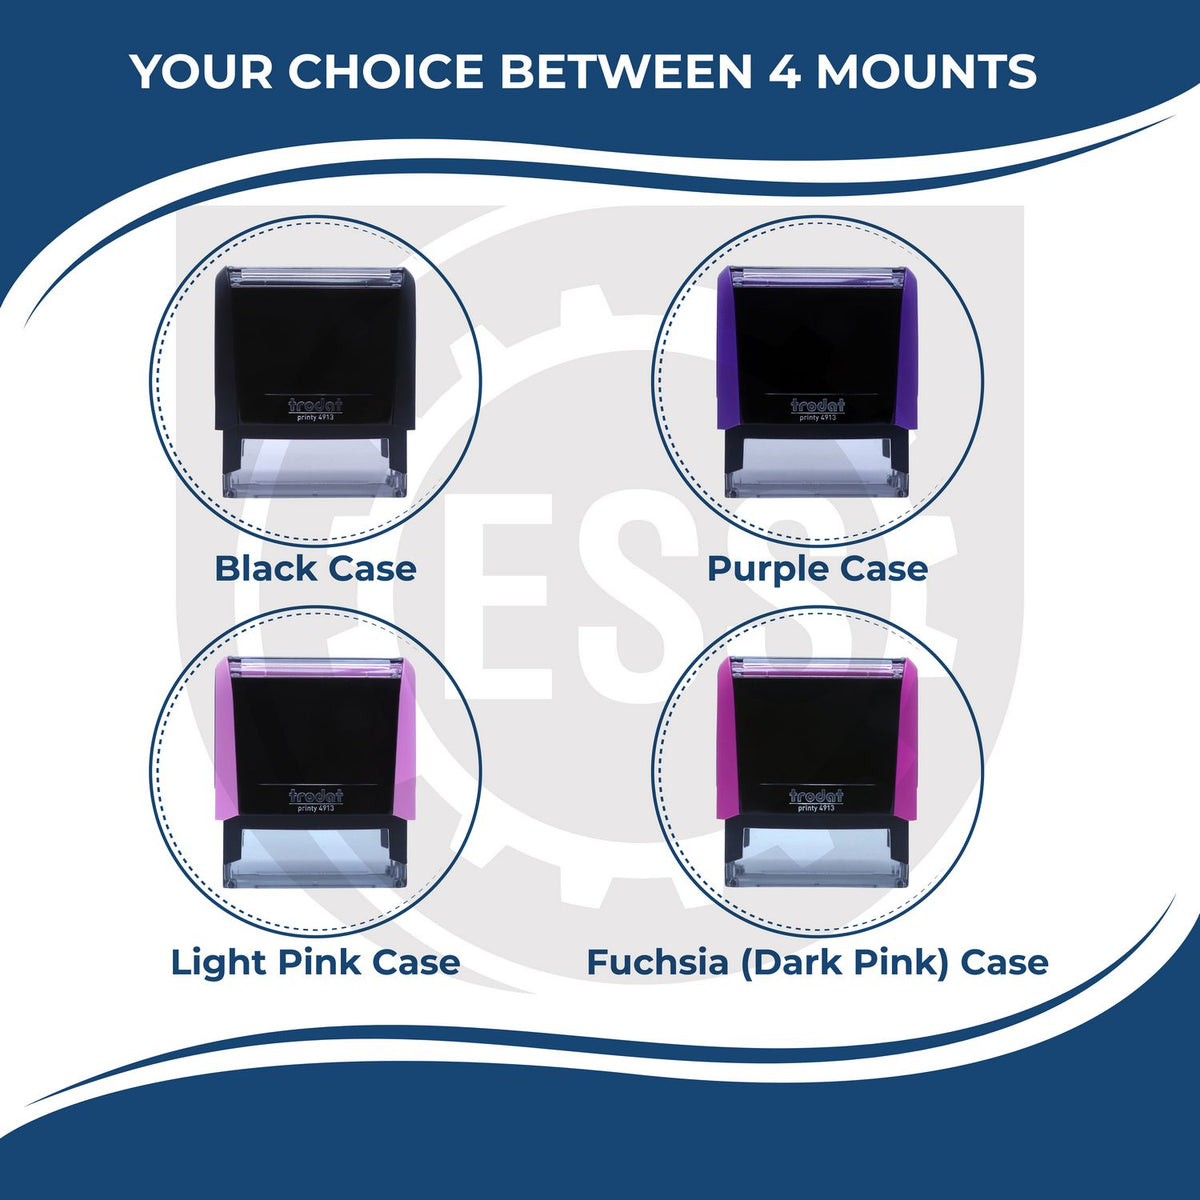 A picture of different colored mounts for the Self-Inking Rectangular Arkansas Notary Stamp featurning a Red, Blue or Black Mount